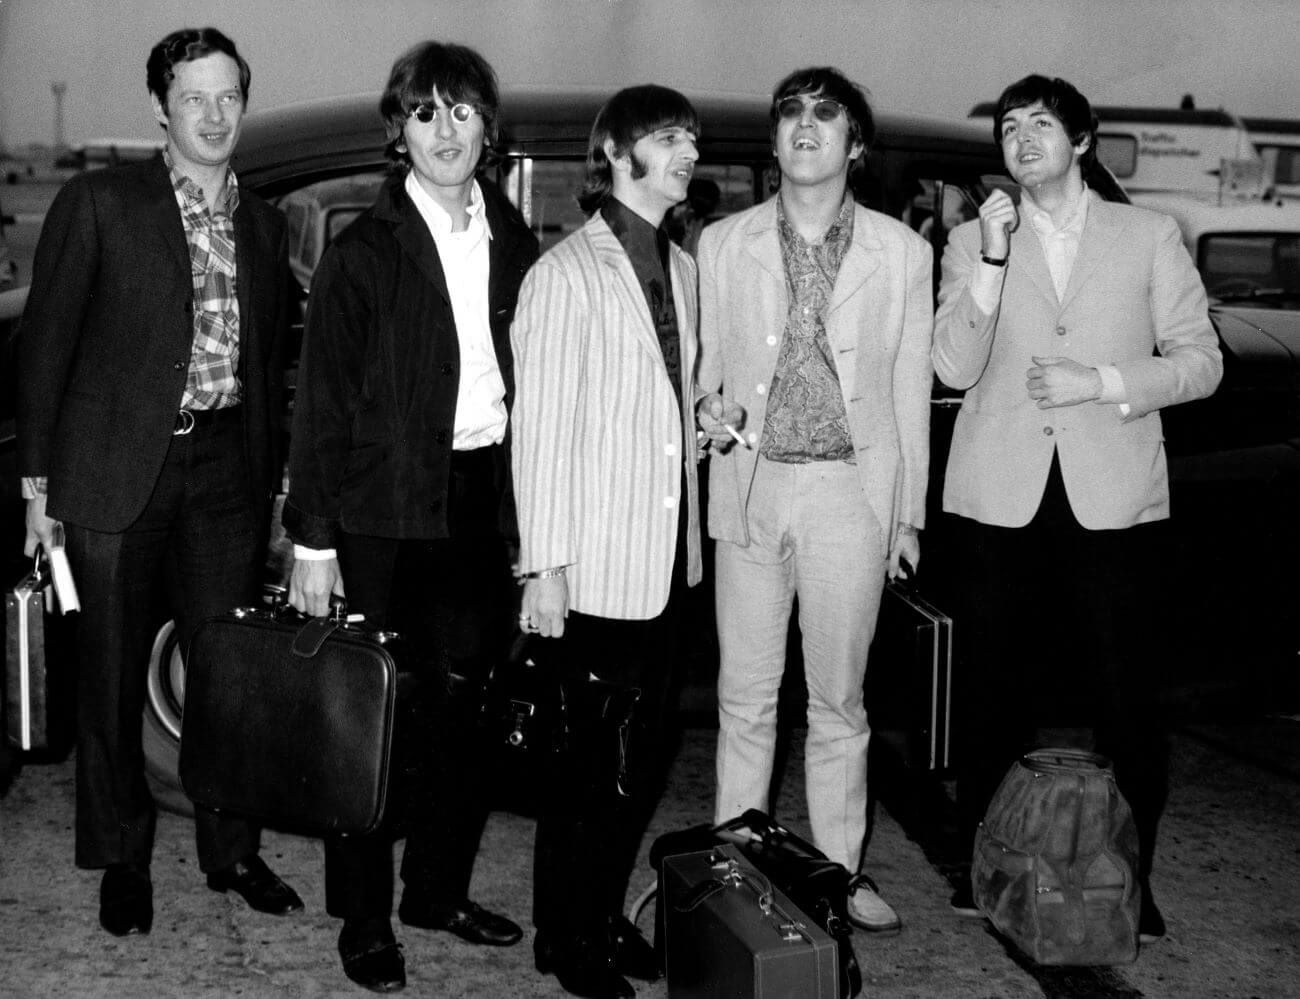 A black and white picture of Brian Epstein, George Harrison, Ringo Starr, John Lennon, and Paul McCartney standing in front of a car at an airport.